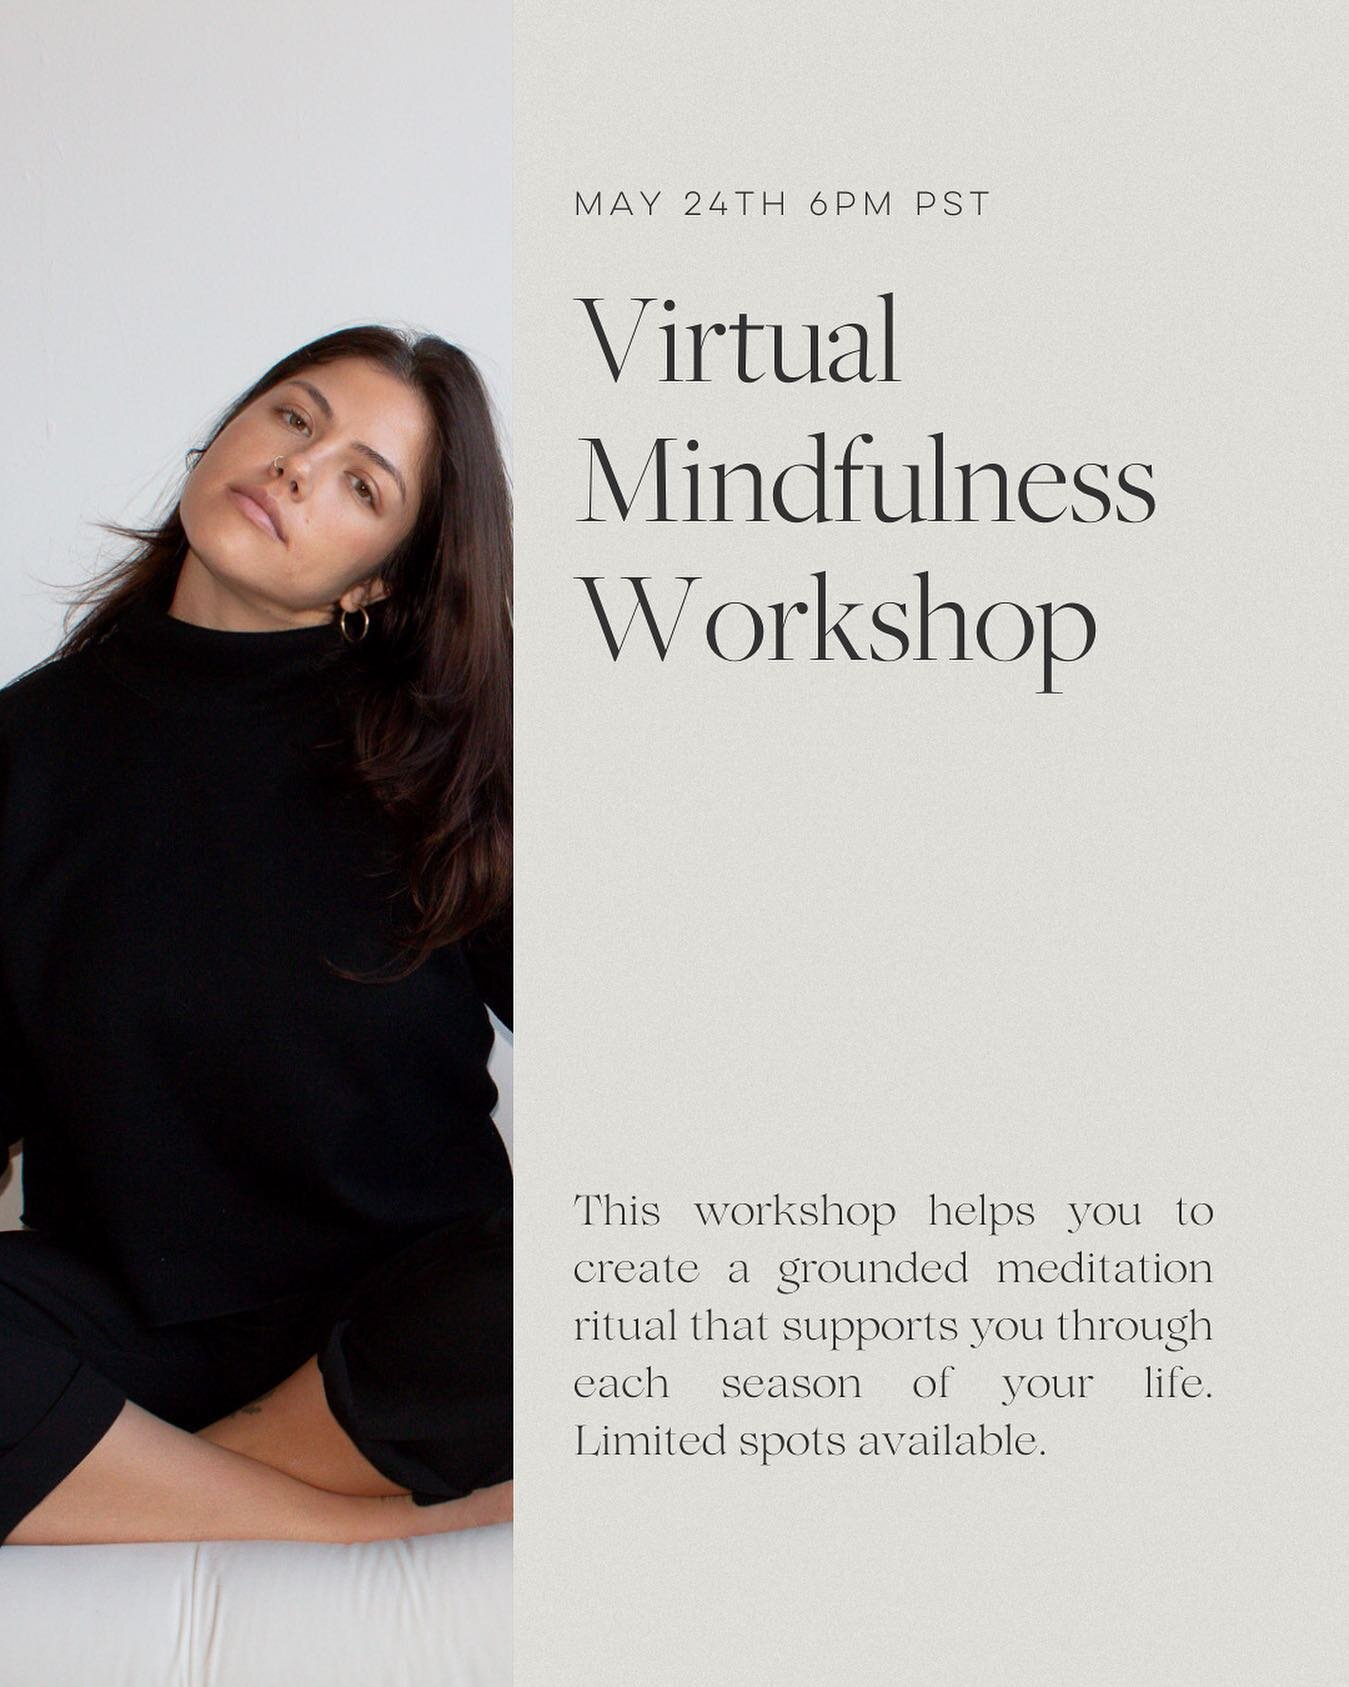 This month&rsquo;s heart felt offering is a mindfulness workshop. In this 60 min experience you will learn a few basic techniques that I use on the regular to stay grounded and steady within myself through the ever changing flow of life.

#mindfulnes